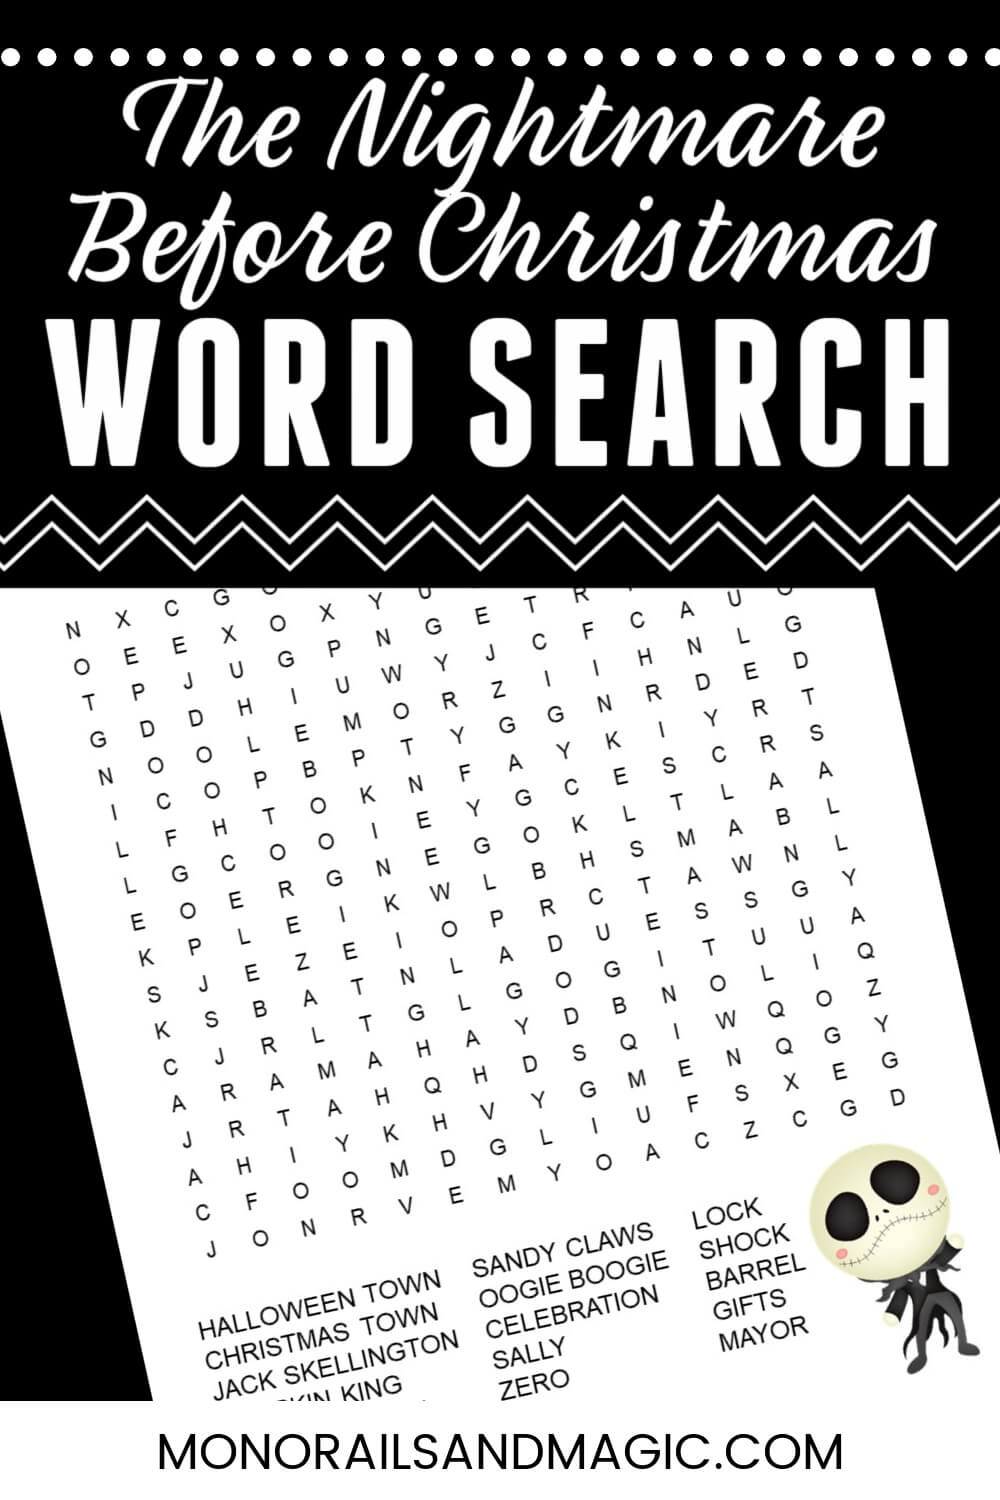 Free printable The Nightmare Before Christmas word search for kids.